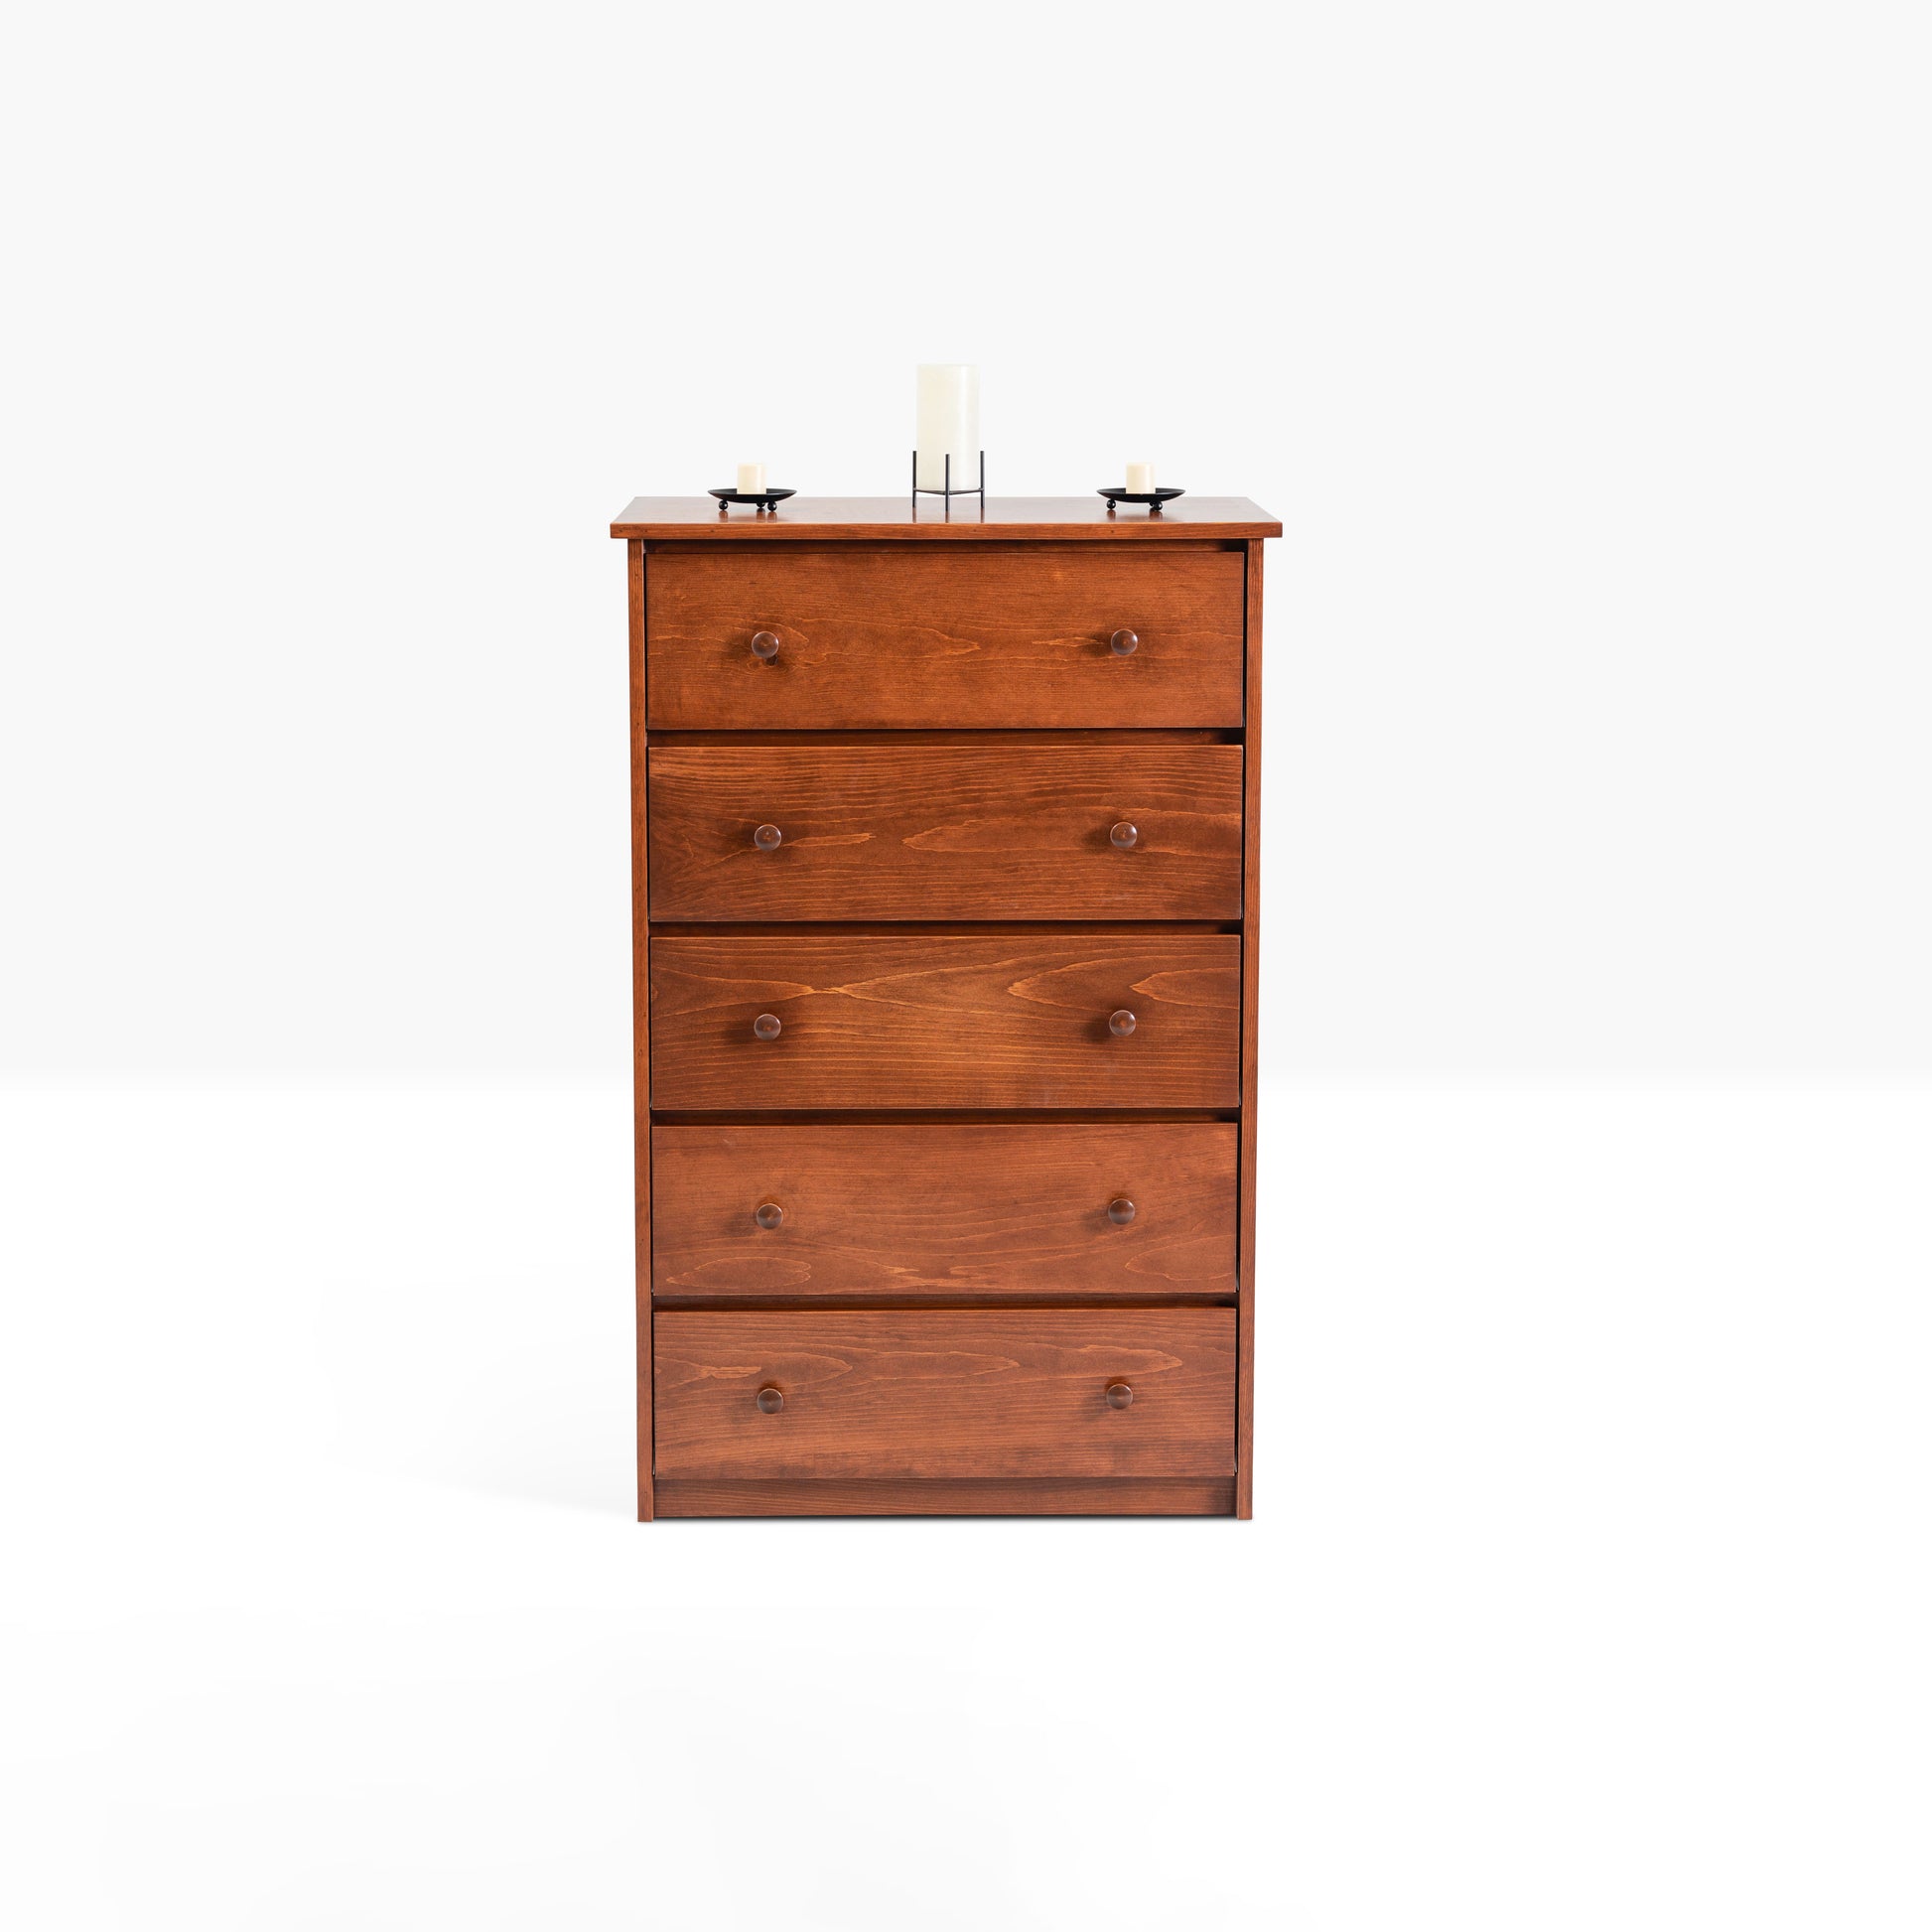 Evergreen Chests are built from birch and pine, and is shown in Traditional Cherry finish with five drawers.